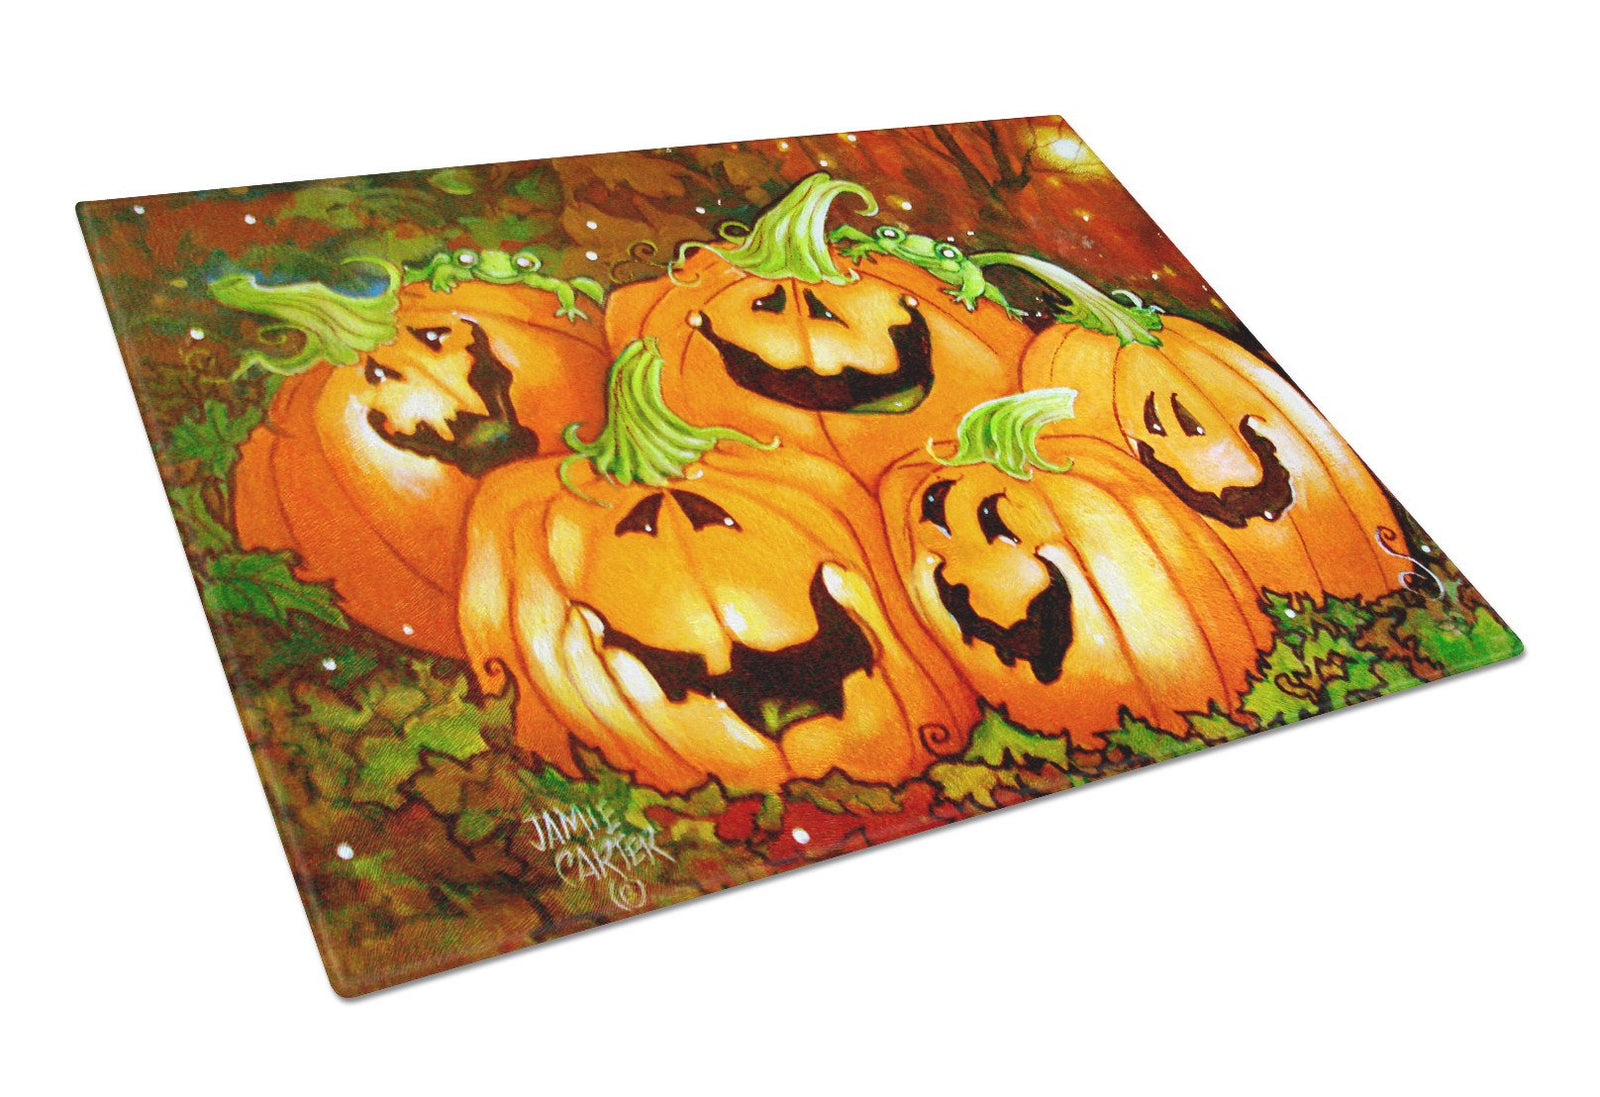 Such a Glowing Personality Pumpkin Halloween Glass Cutting Board Large PJC1071LCB by Caroline's Treasures